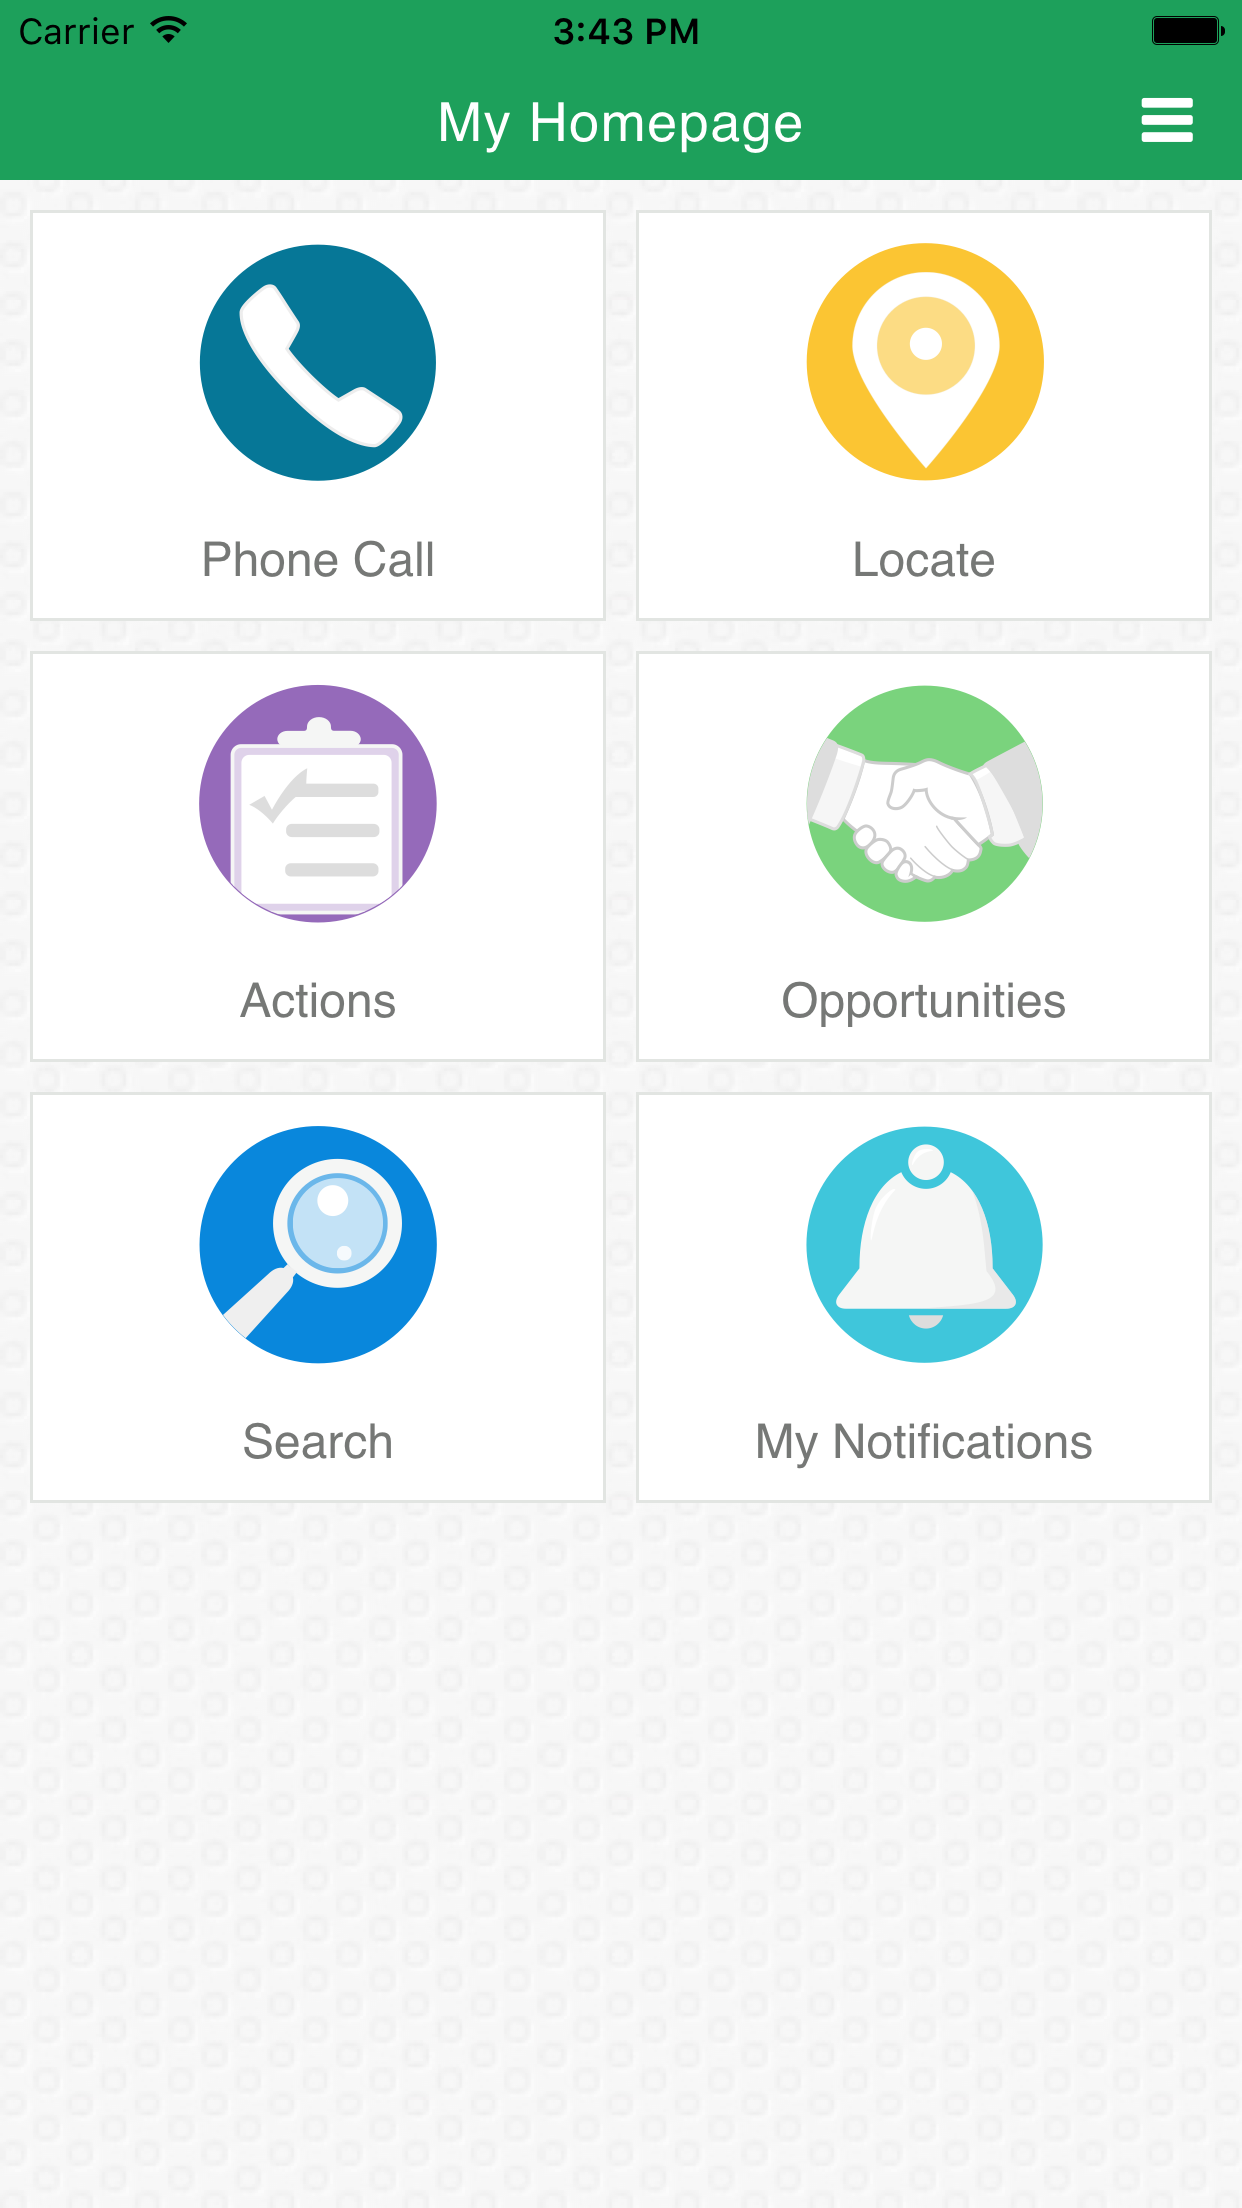 ClearView CRM Mobile fundraising software supports on-the-go fundraisers